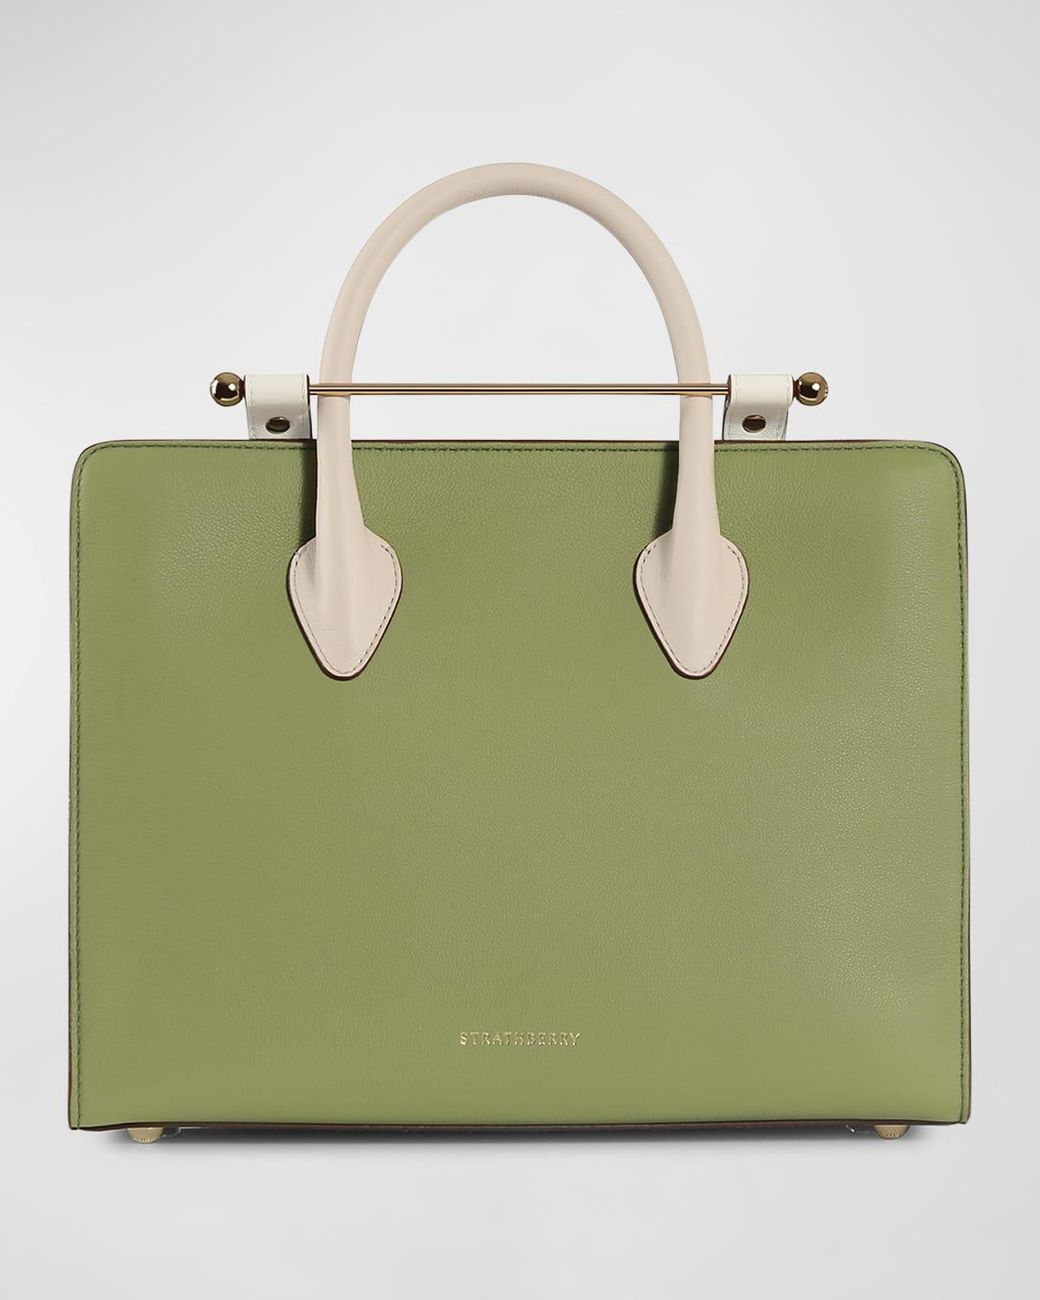 The Strathberry Nano Tote - Top Handle Leather Mini Tote Bag - Green